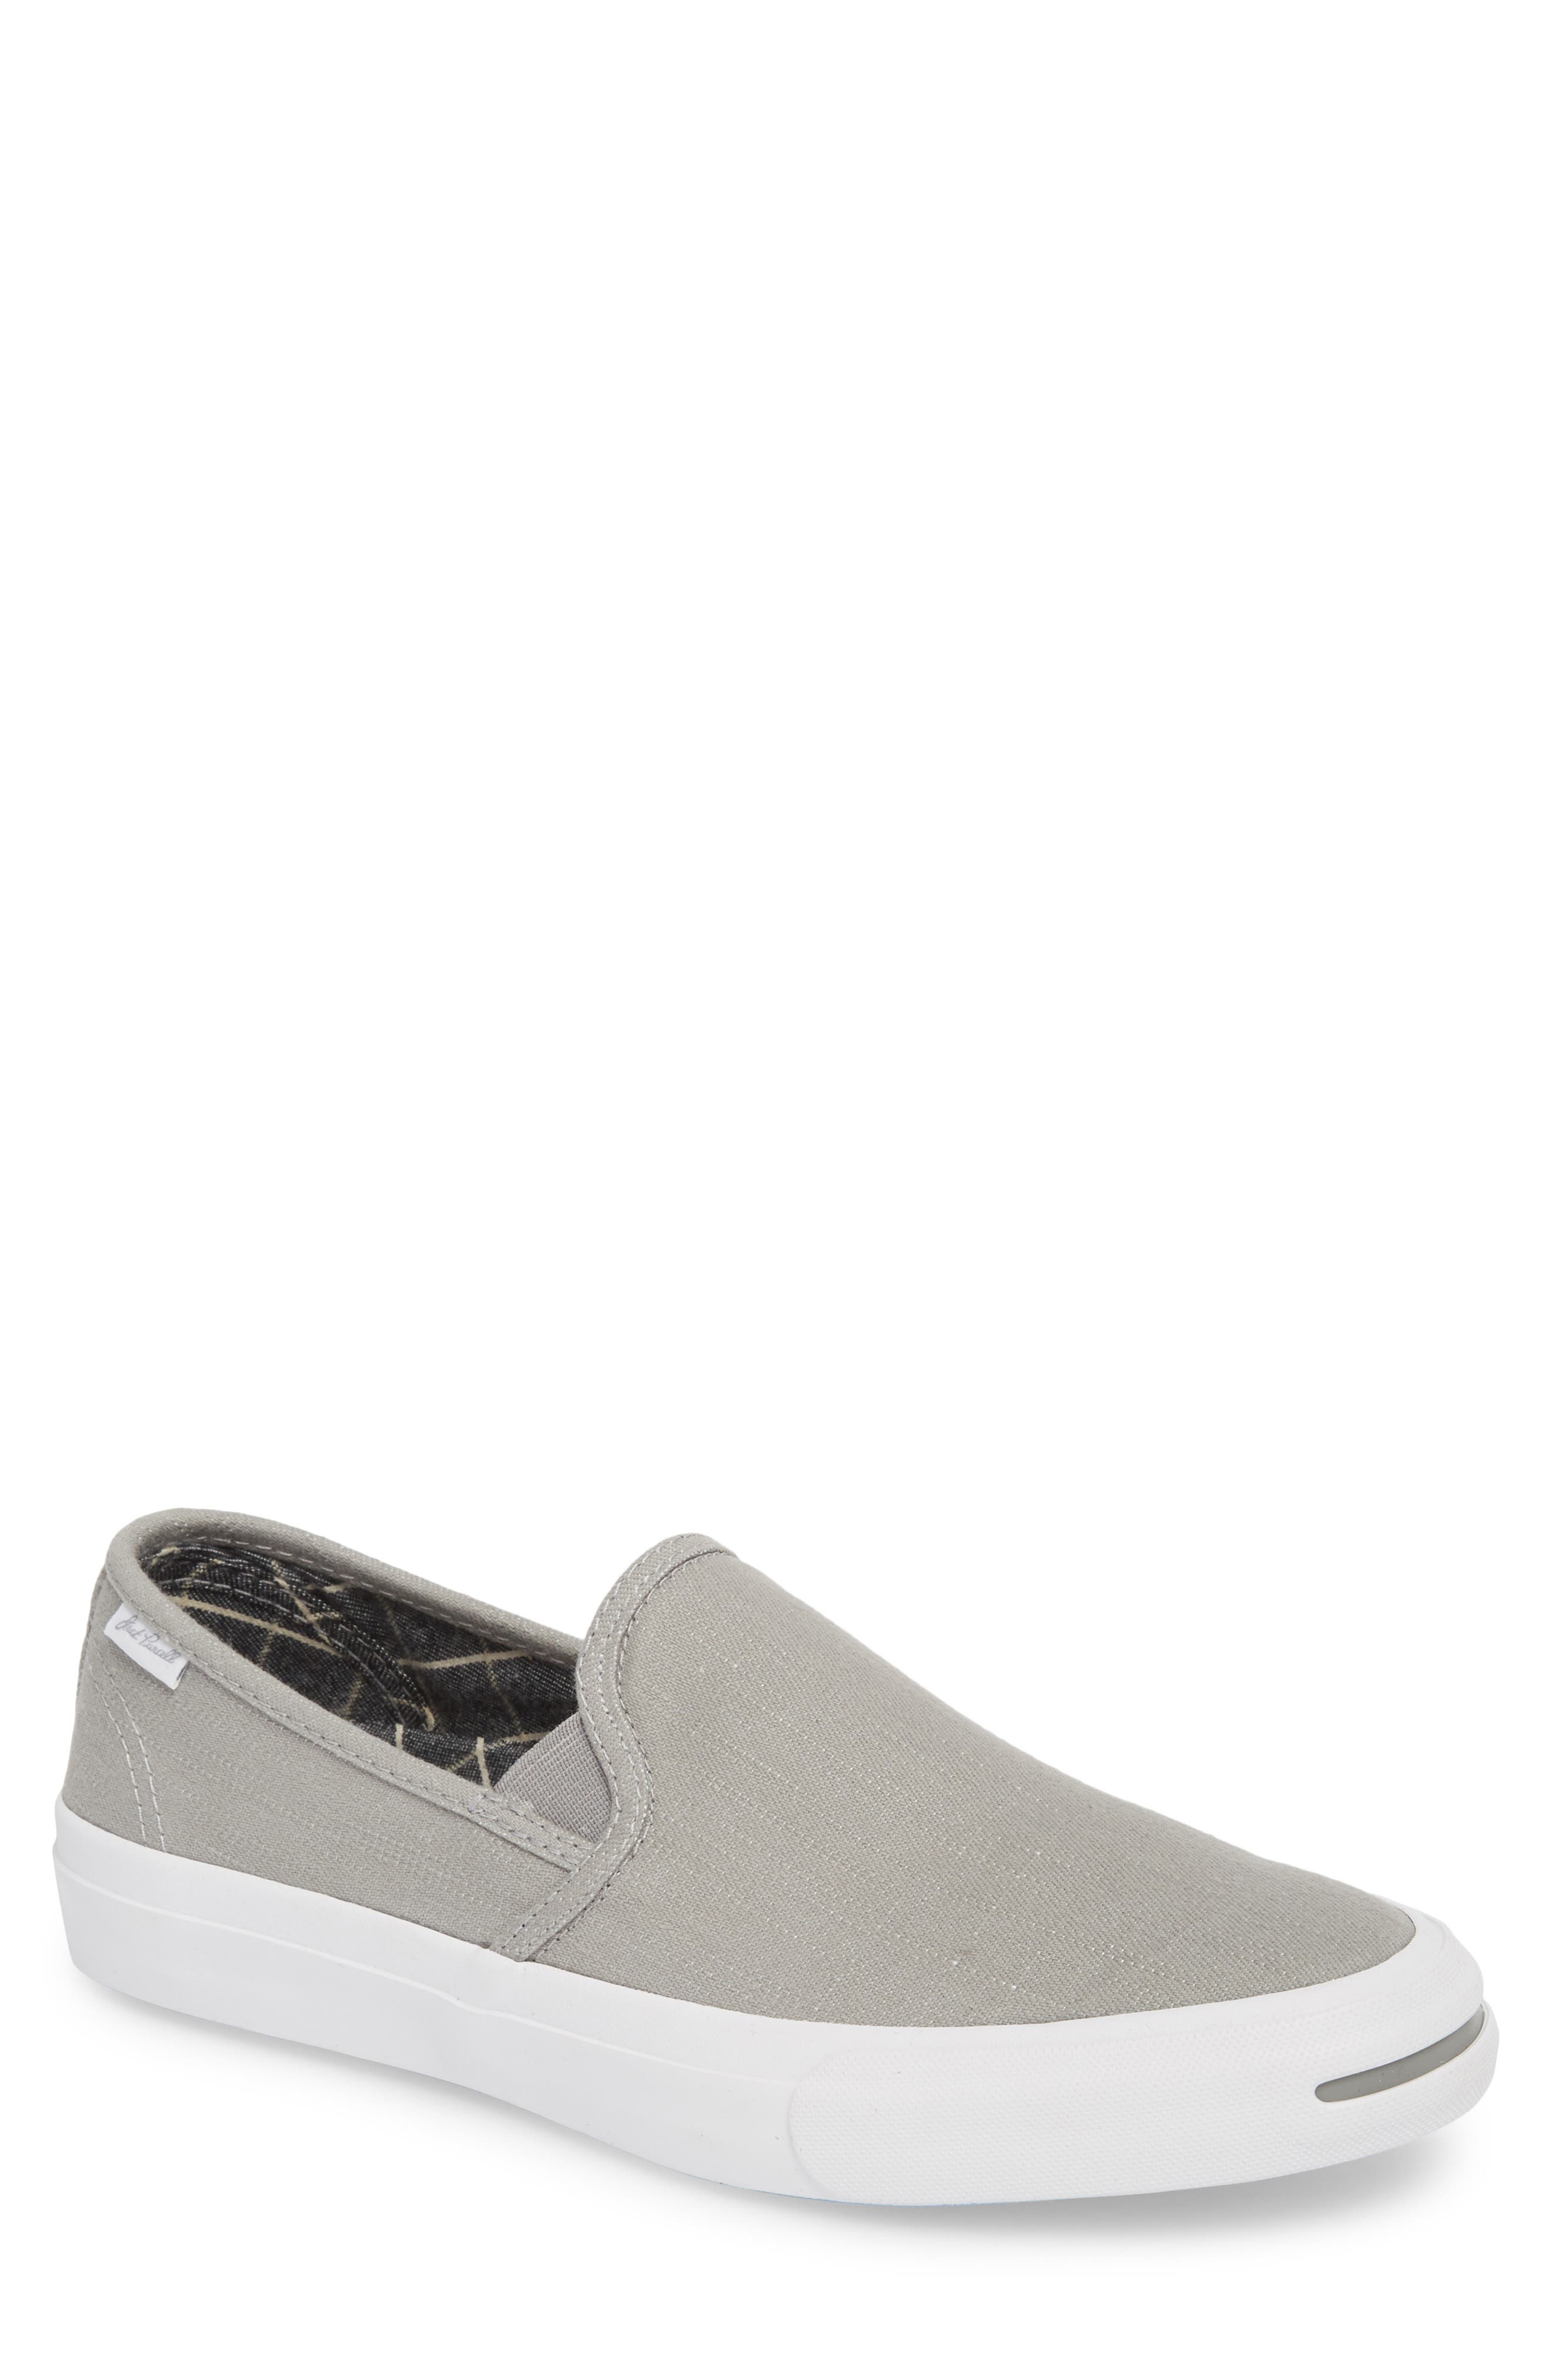 converse jack purcell low profile slip on